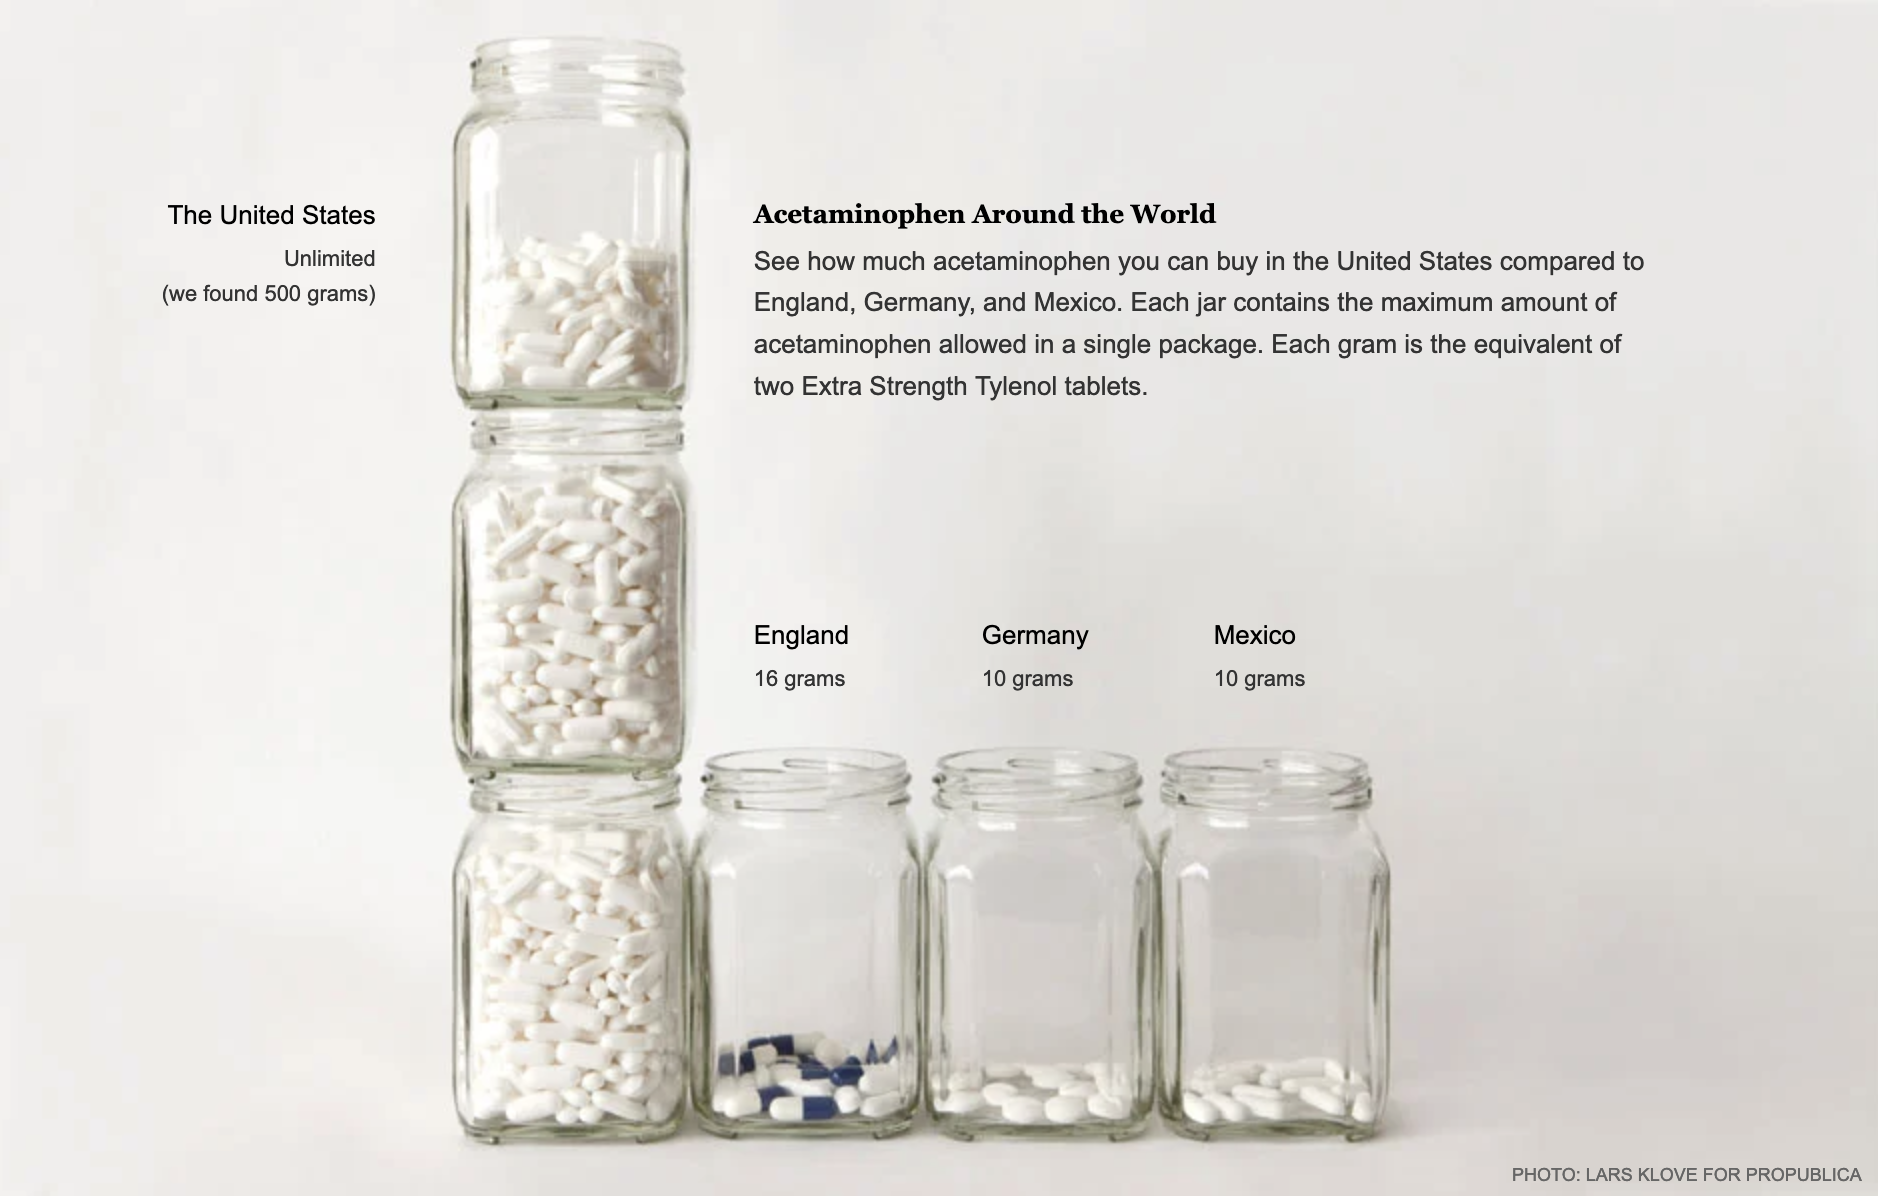 A photo of jars of pills showing the amount of pills of acetominophen you can buy in the USA compared to England, Germany and Mexico